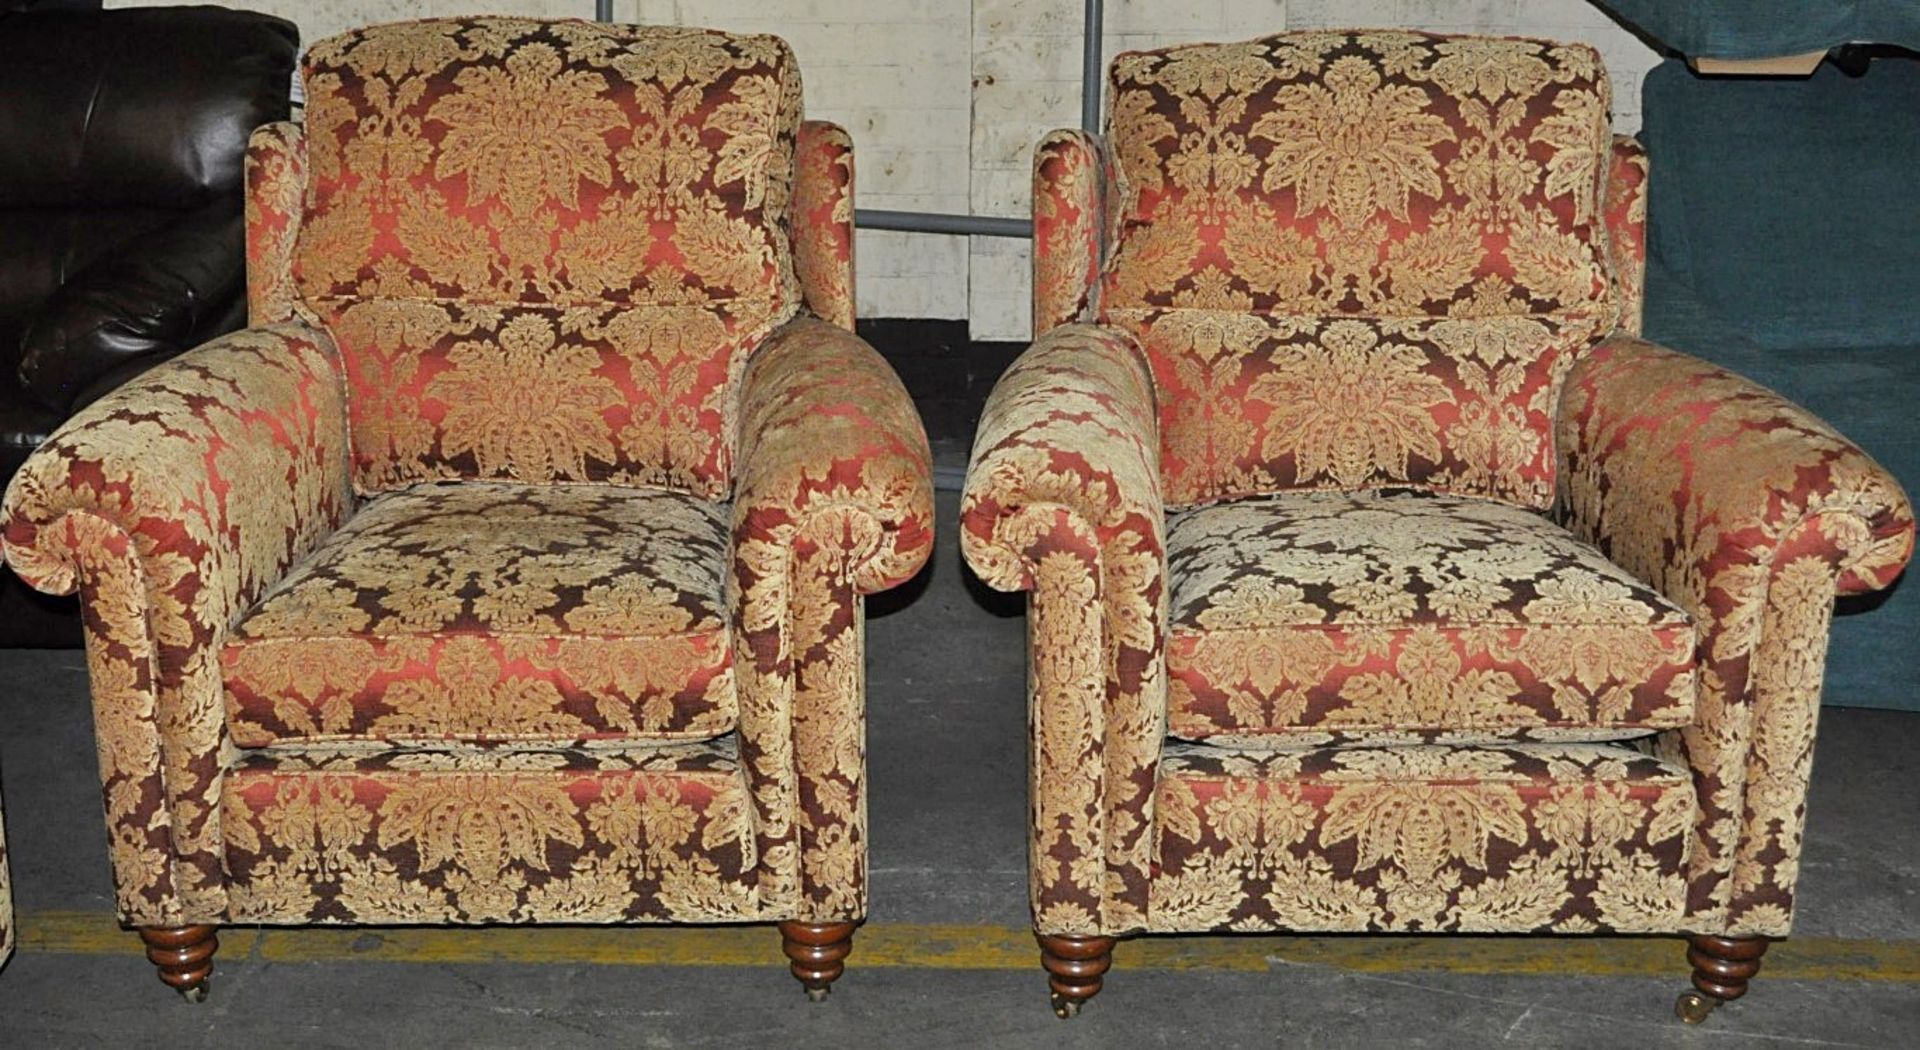 1 x Duresta Grande Sofa & 2 Matching Chair's – Finest Made Sofa's in the UK – All come in a fabulous - Image 3 of 3